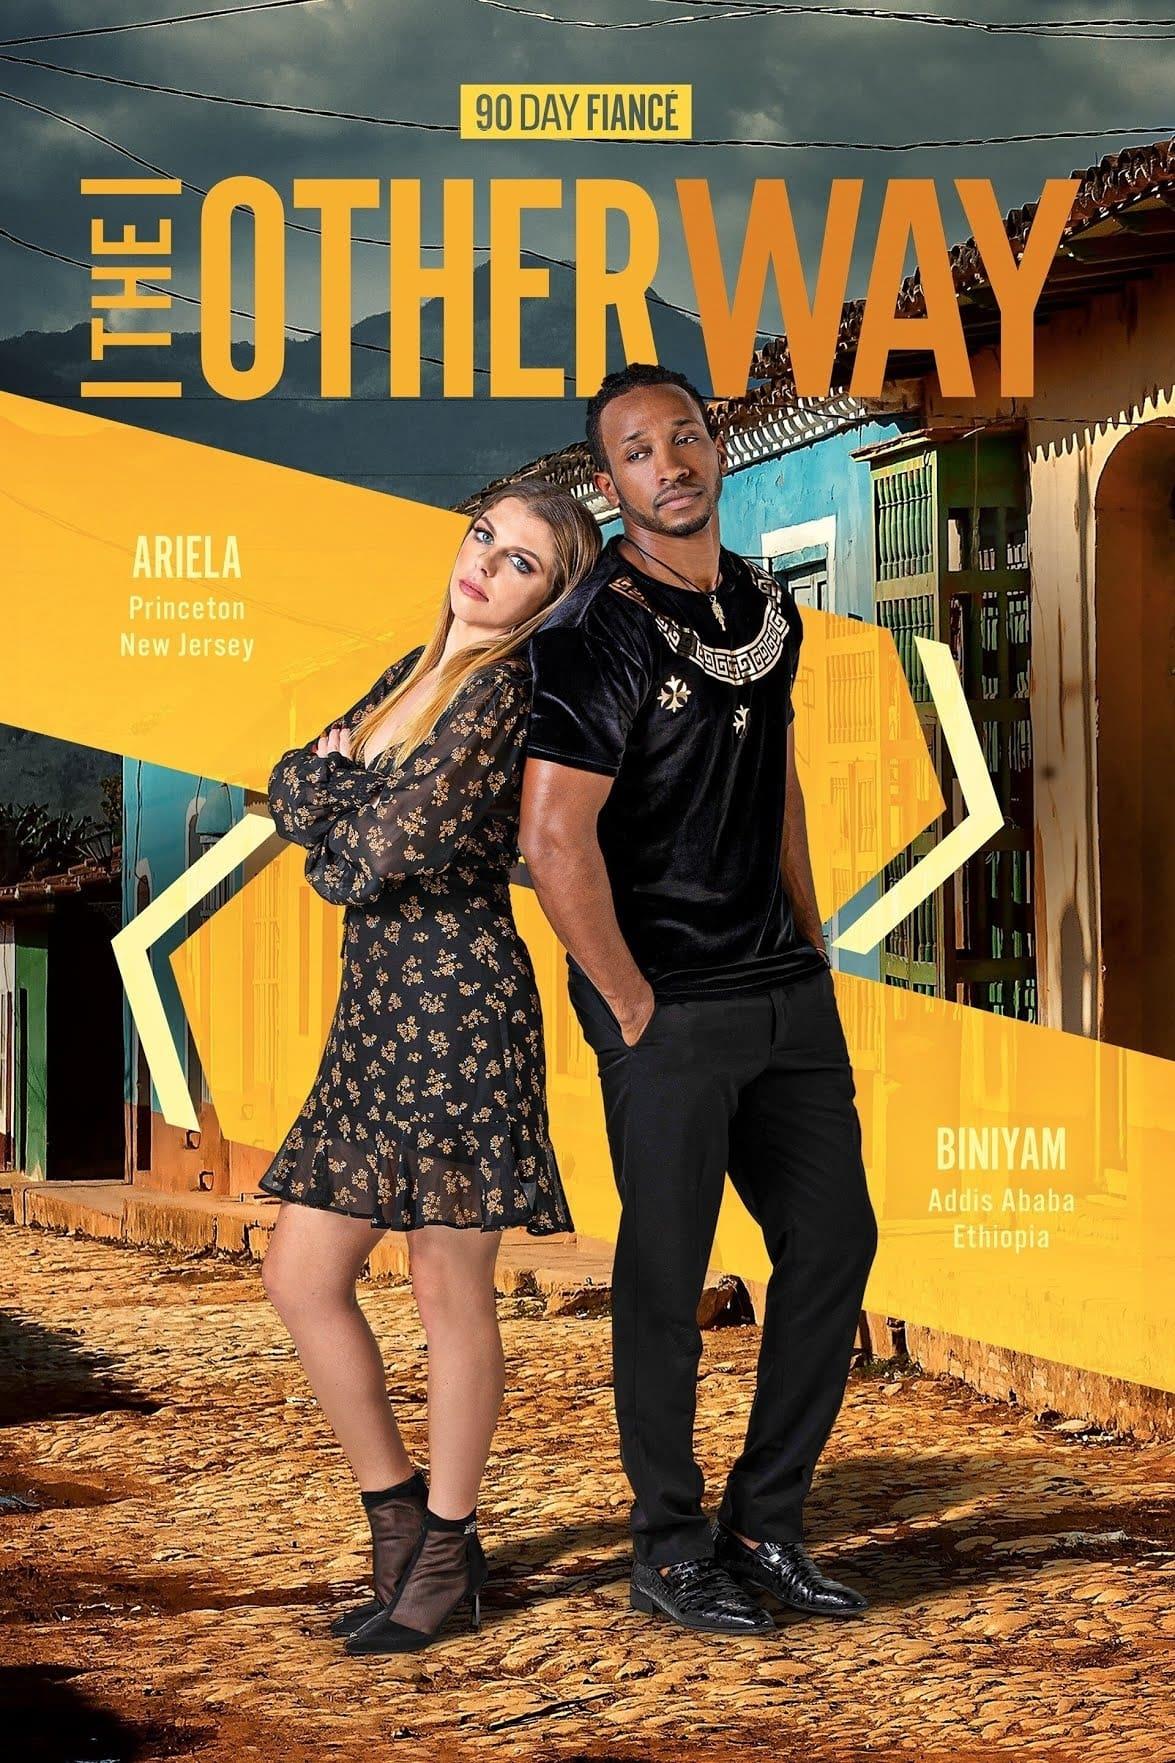 90 Day Fiancé: The Other Way poster